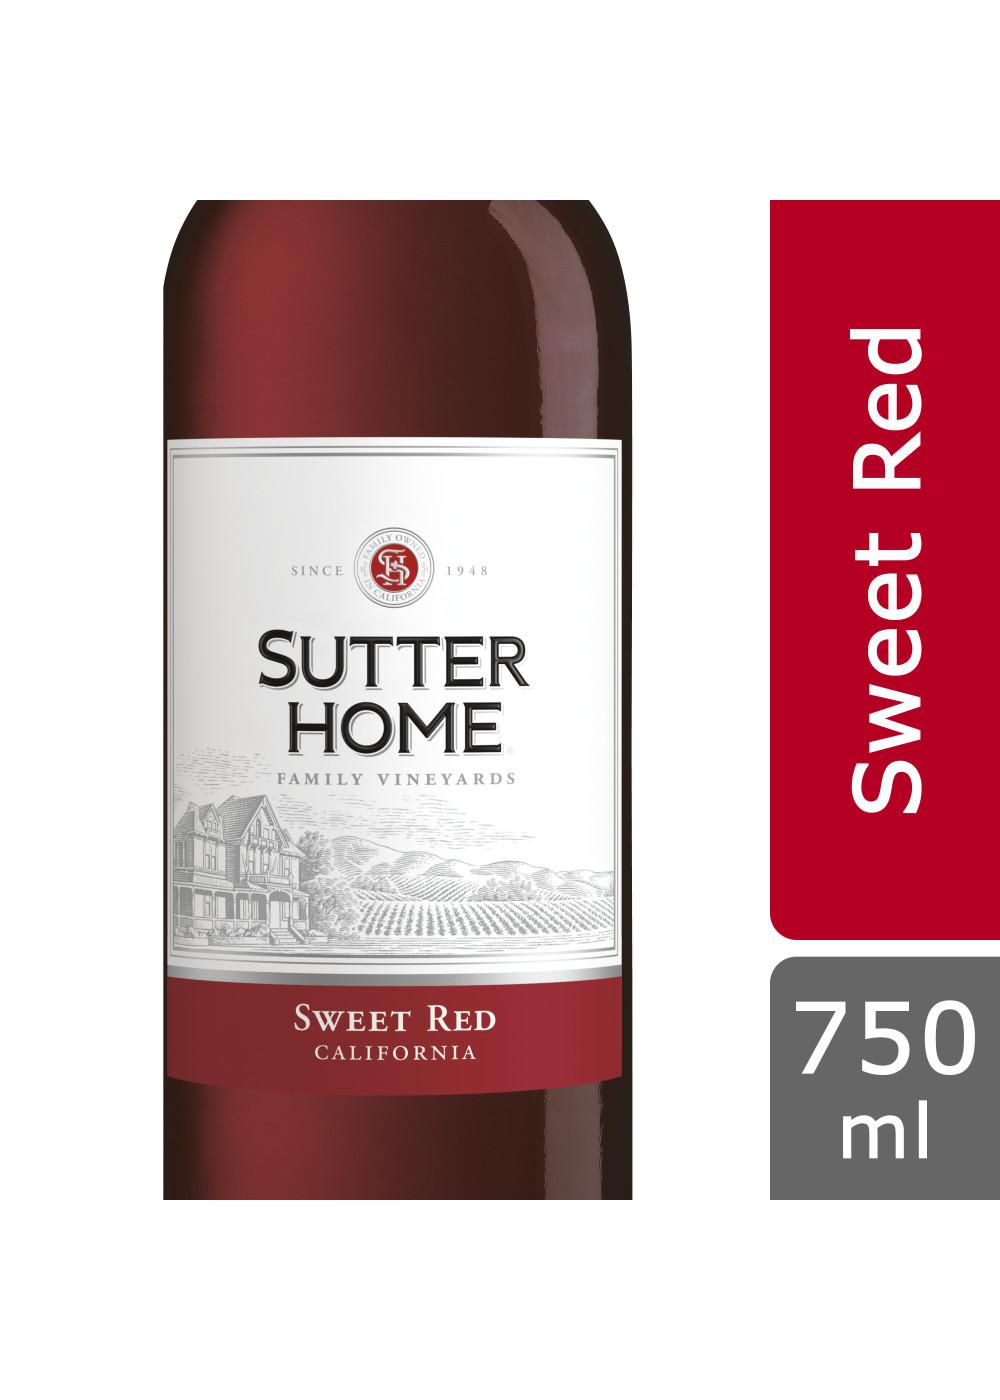 Sutter Home Family Vineyards Sweet Red Wine; image 3 of 5